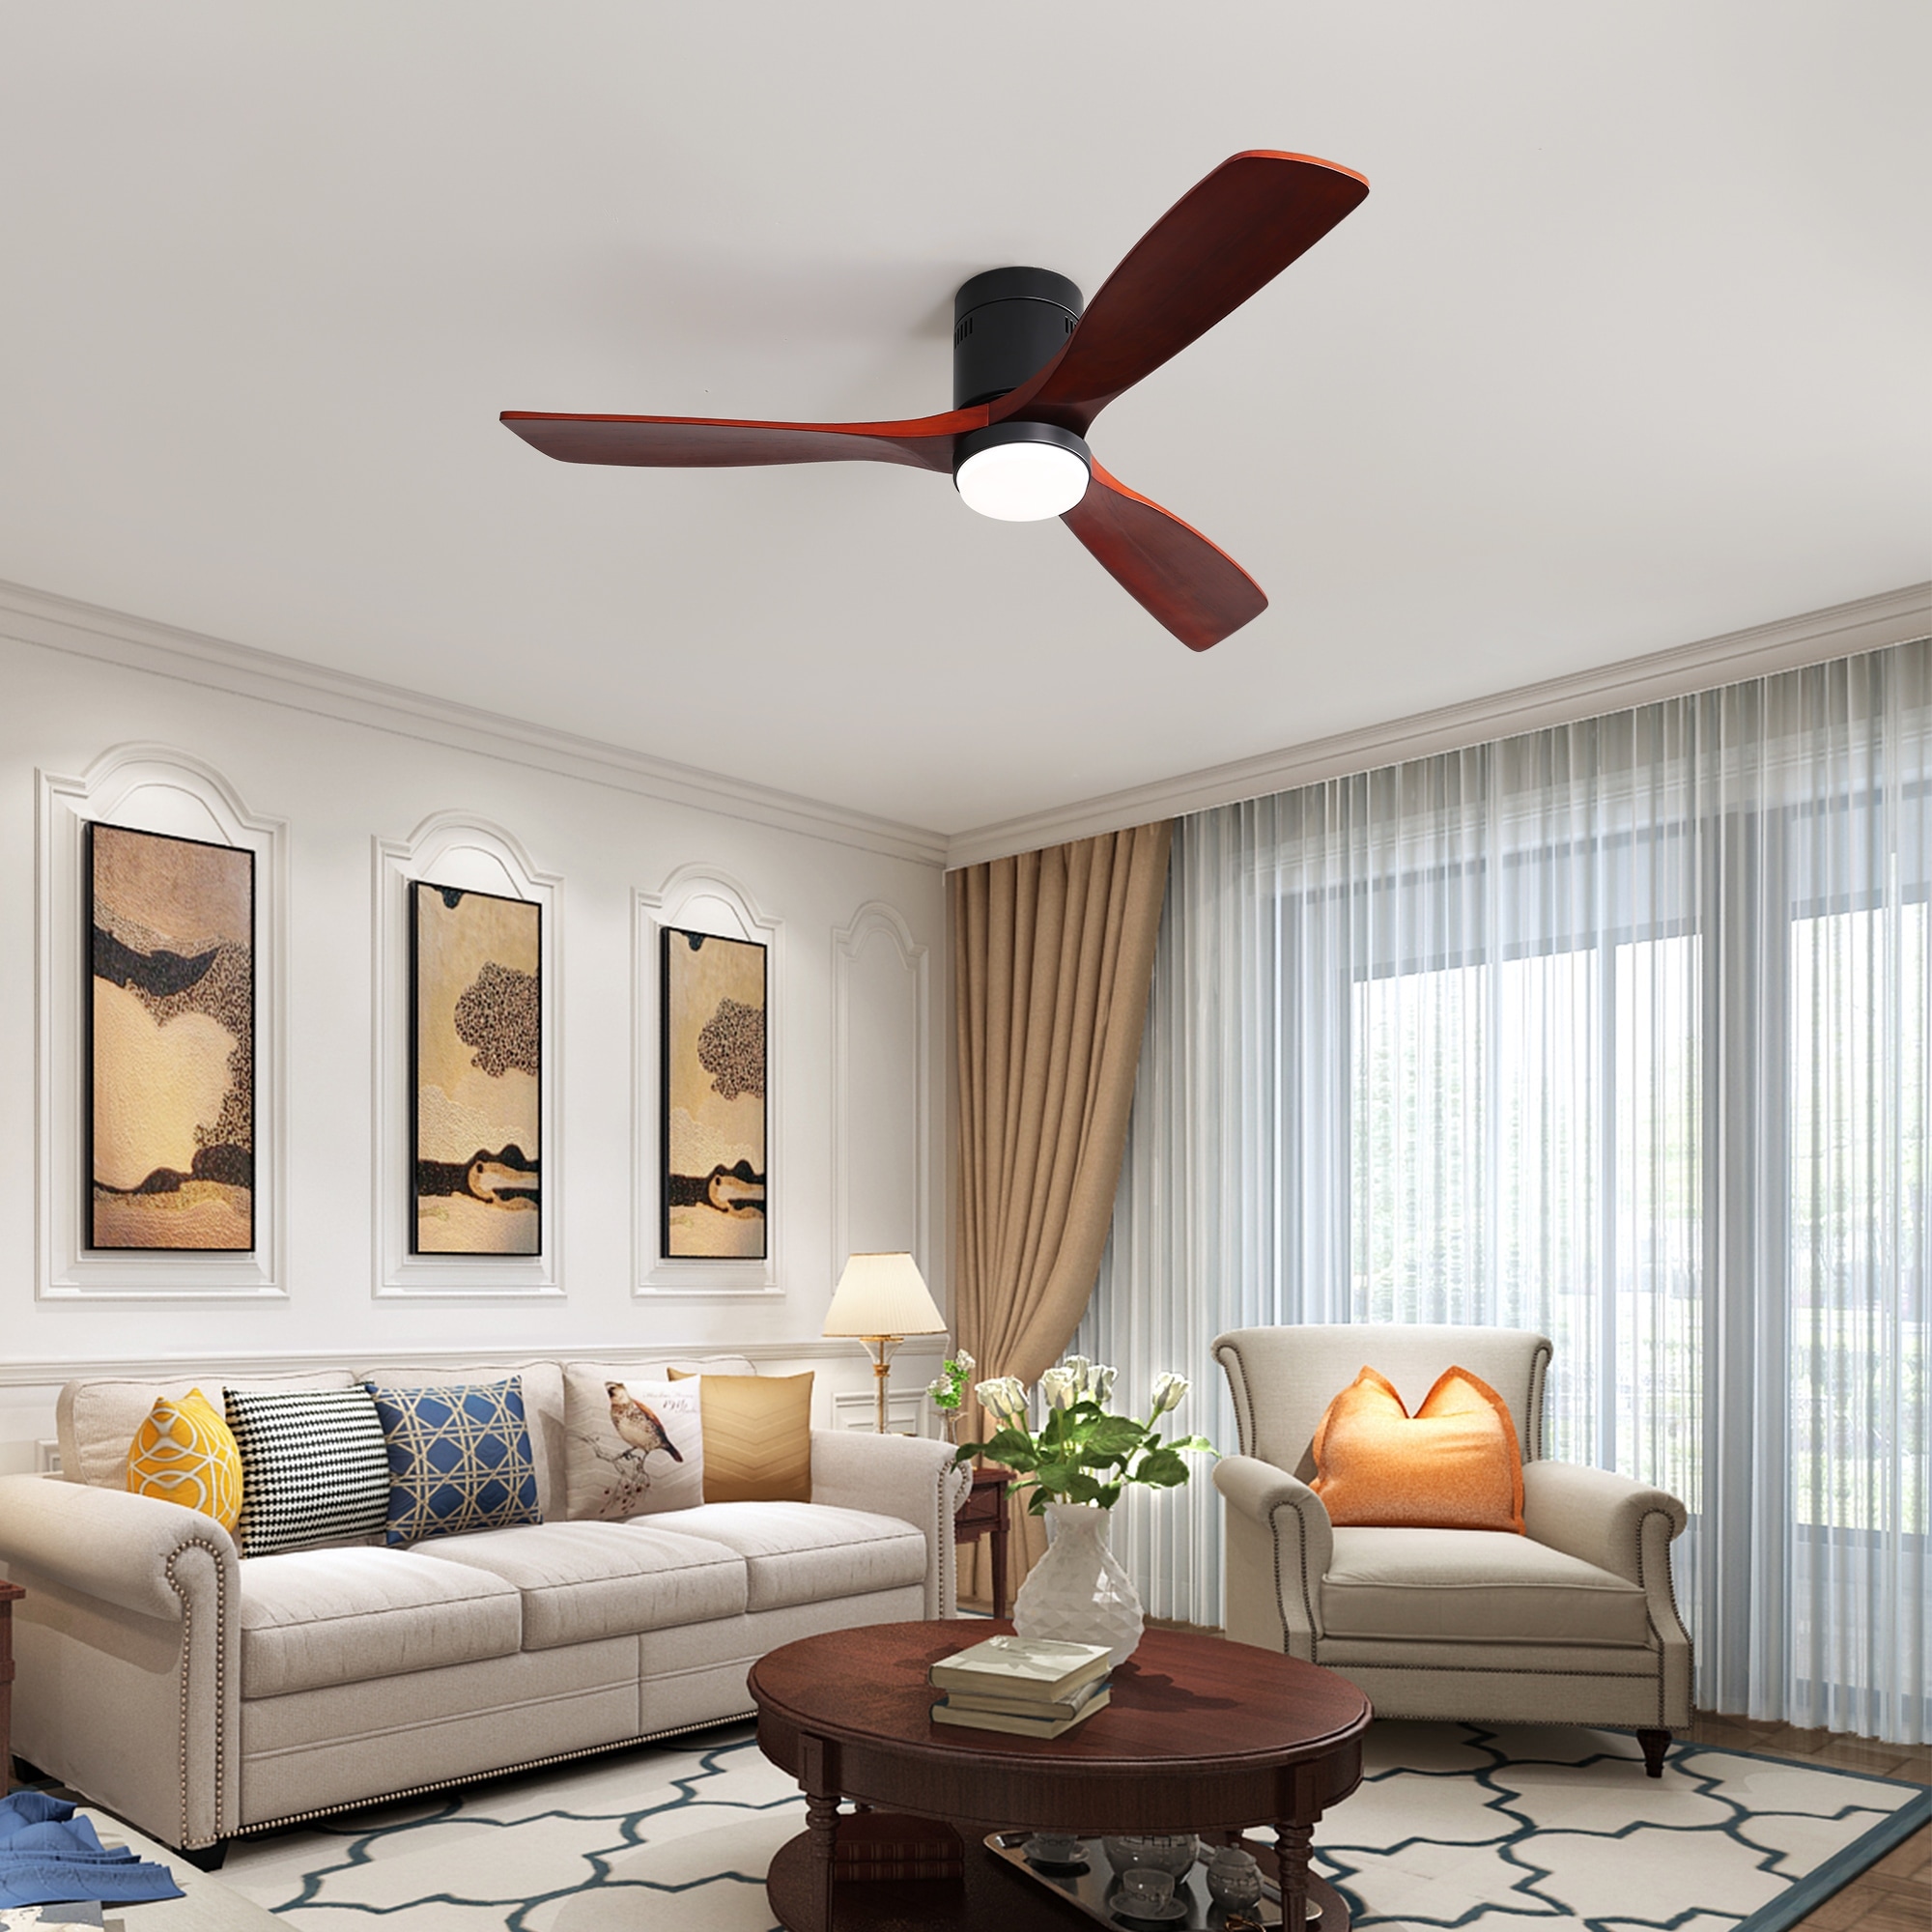 https://ak1.ostkcdn.com/images/products/is/images/direct/c94b3bf6cf8687ecae27334bcac188b1f6a2d24b/52%22-Matte-Black-Indoor-Outdoor-Wood-Ceiling-Fan-with-Lights%2CRemote-Control.jpg